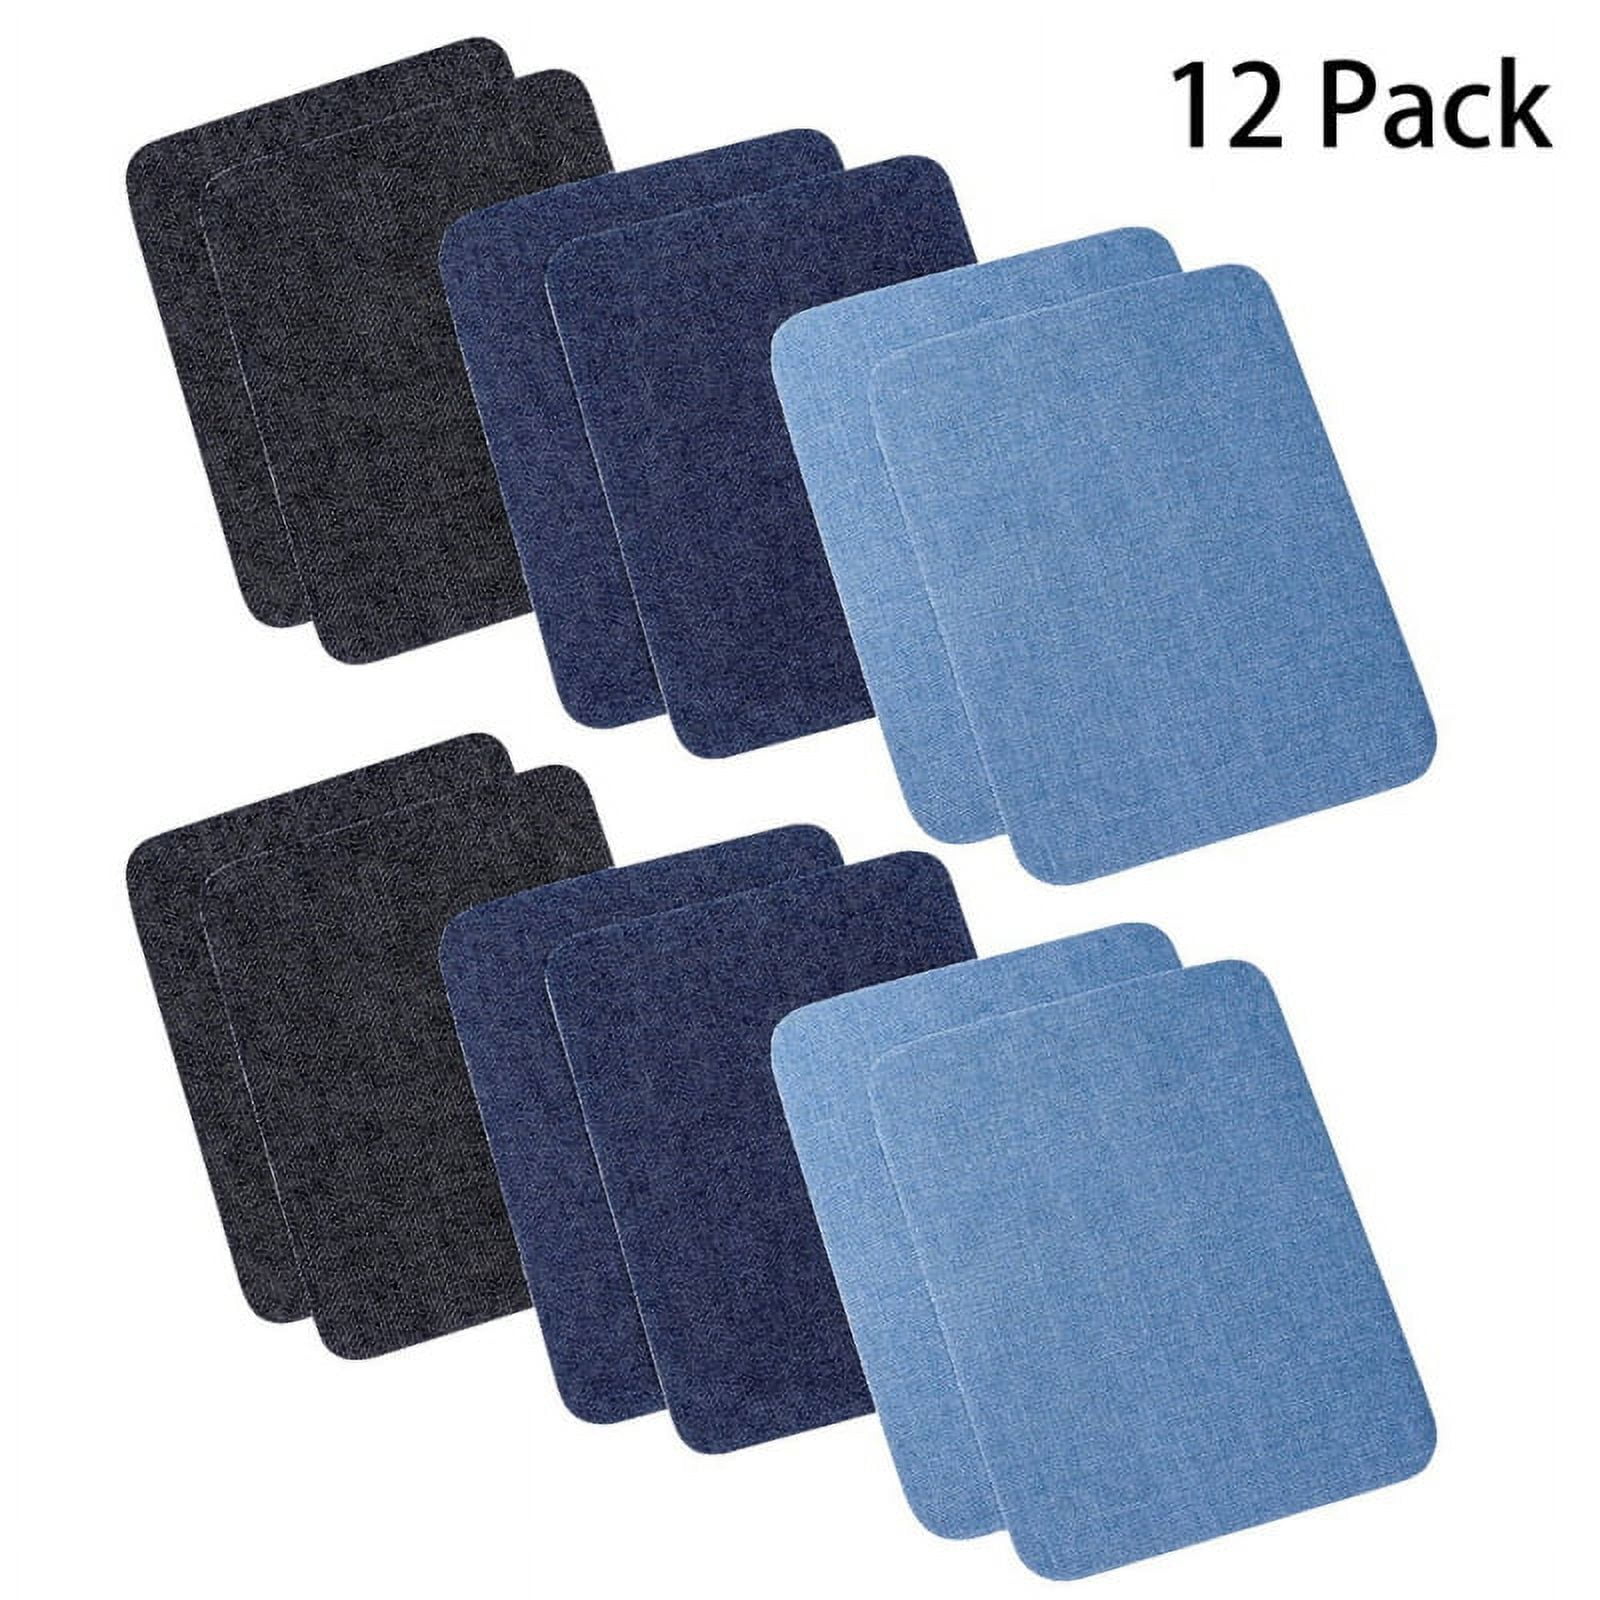 12 Pcs Iron On Denim Patches for DIY Clothing Jeans Jackets Bags